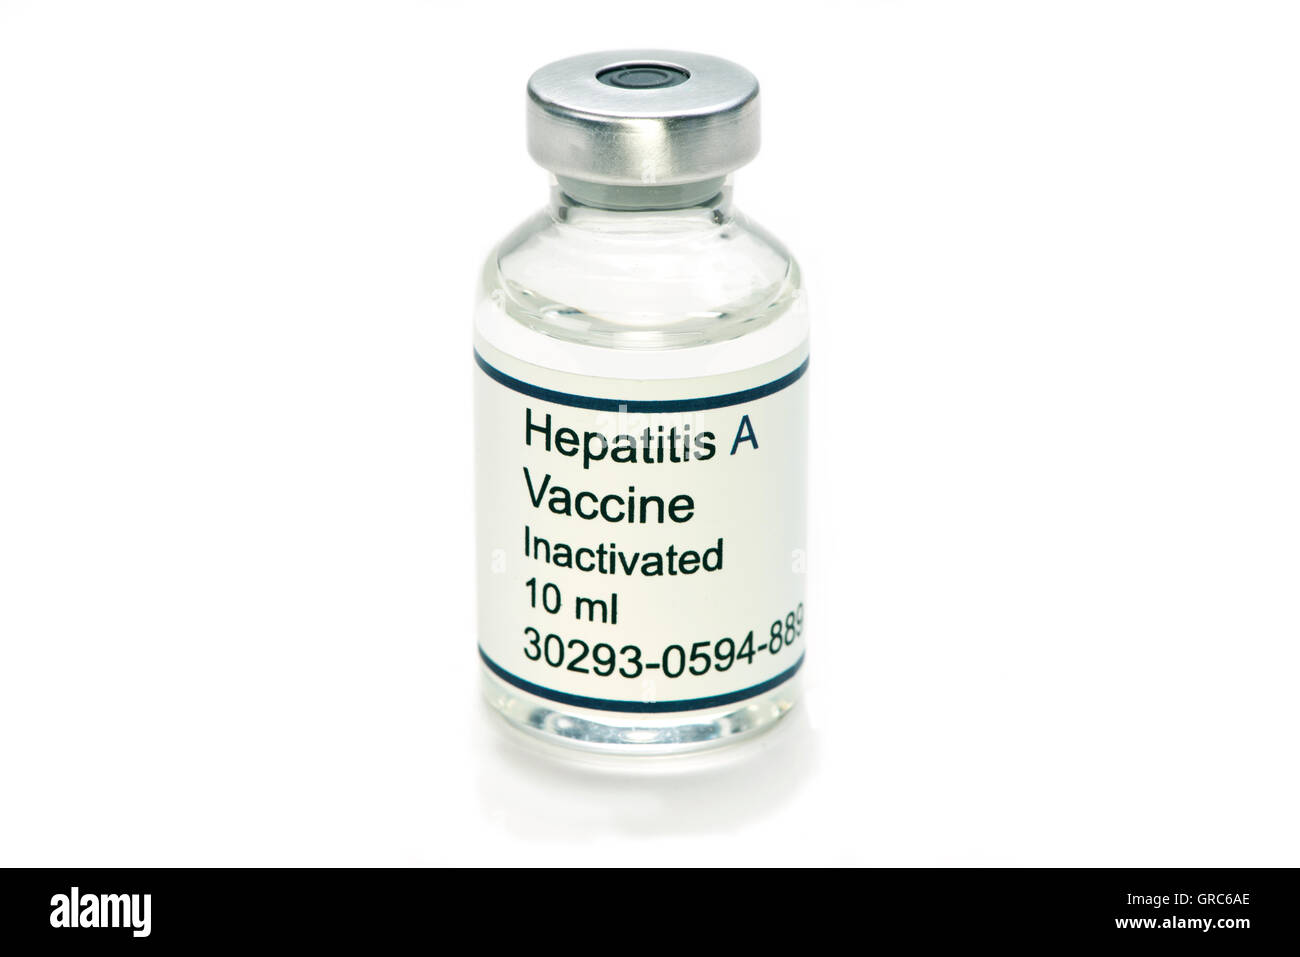 Hepatitis A virus vaccine vial. Labels are fictitious and created by the photographer. Stock Photo